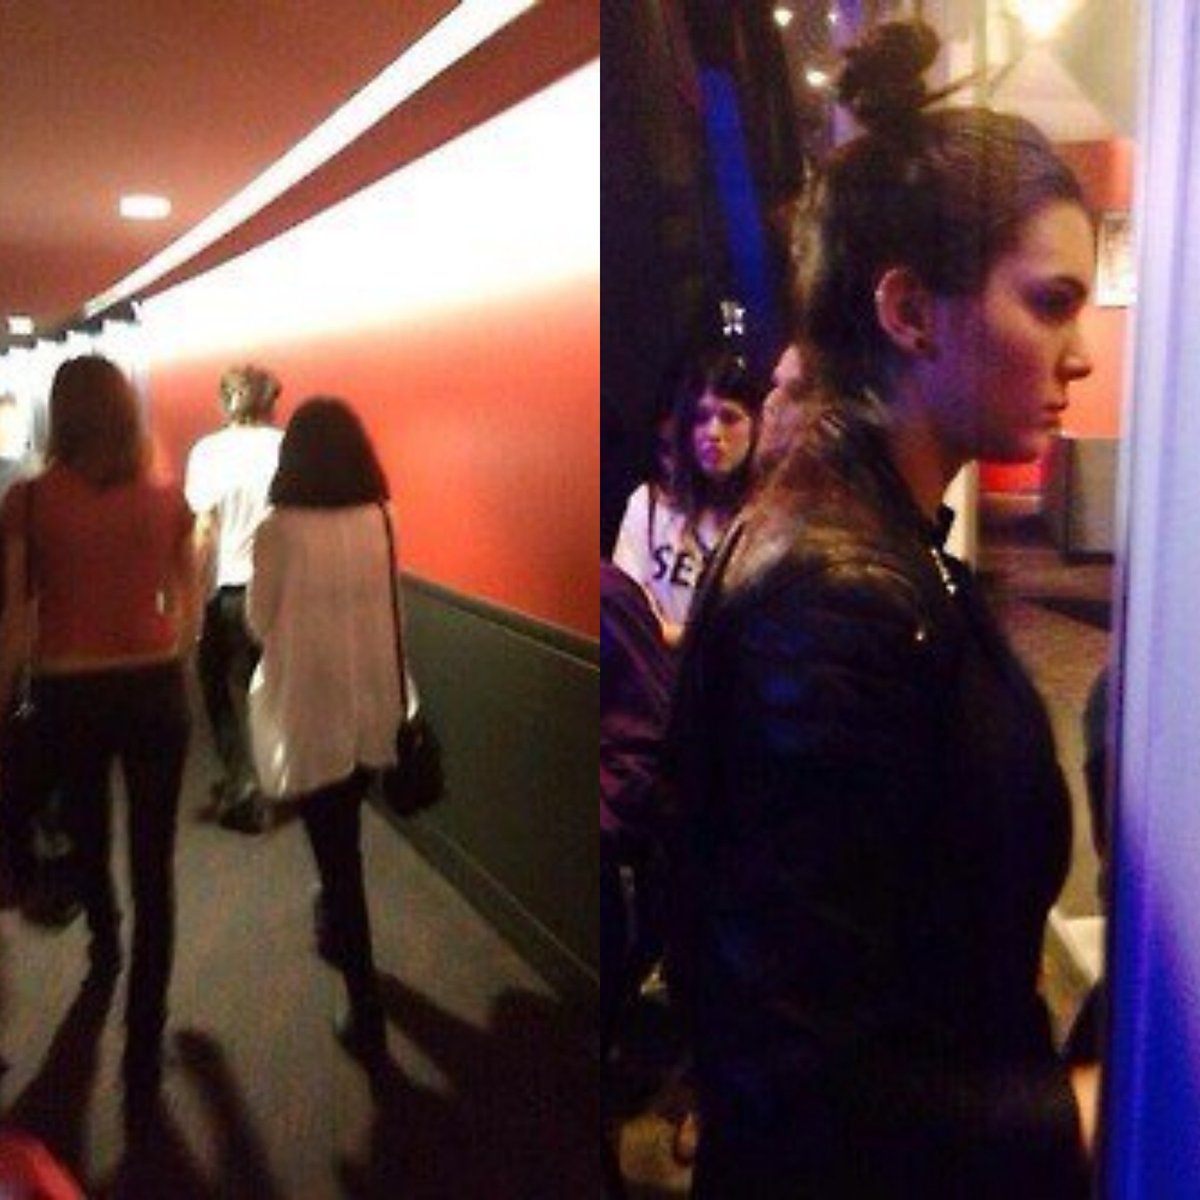 24 February 2014: They attend The Miley Cyrus concert in LA. Harry was also seen wearing Kendall's ring.